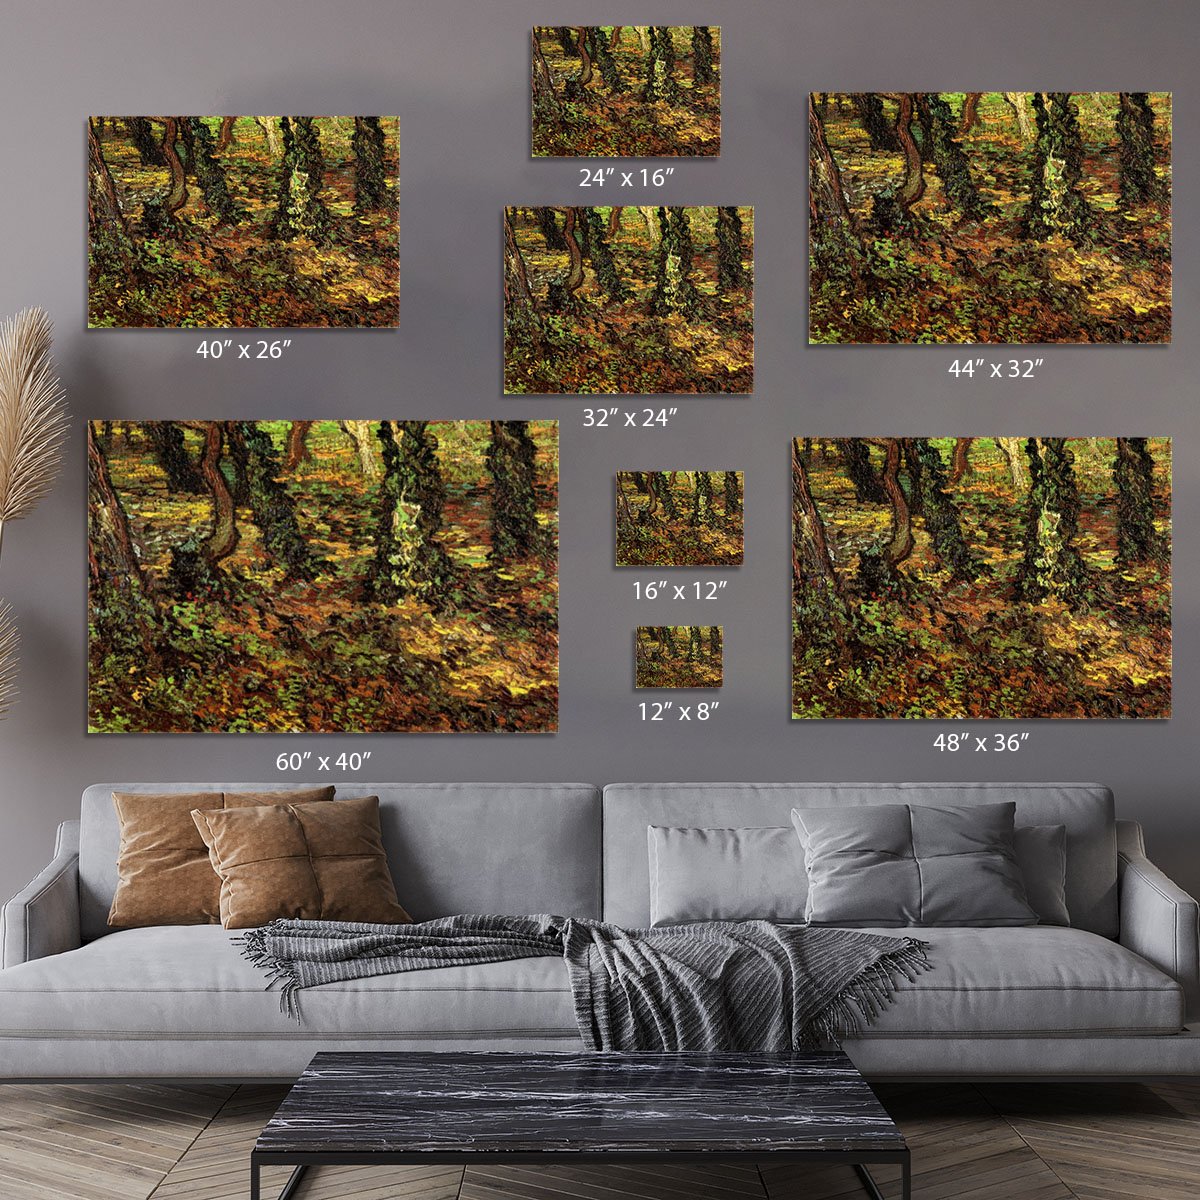 Tree Trunks with Ivy by Van Gogh Canvas Print or Poster